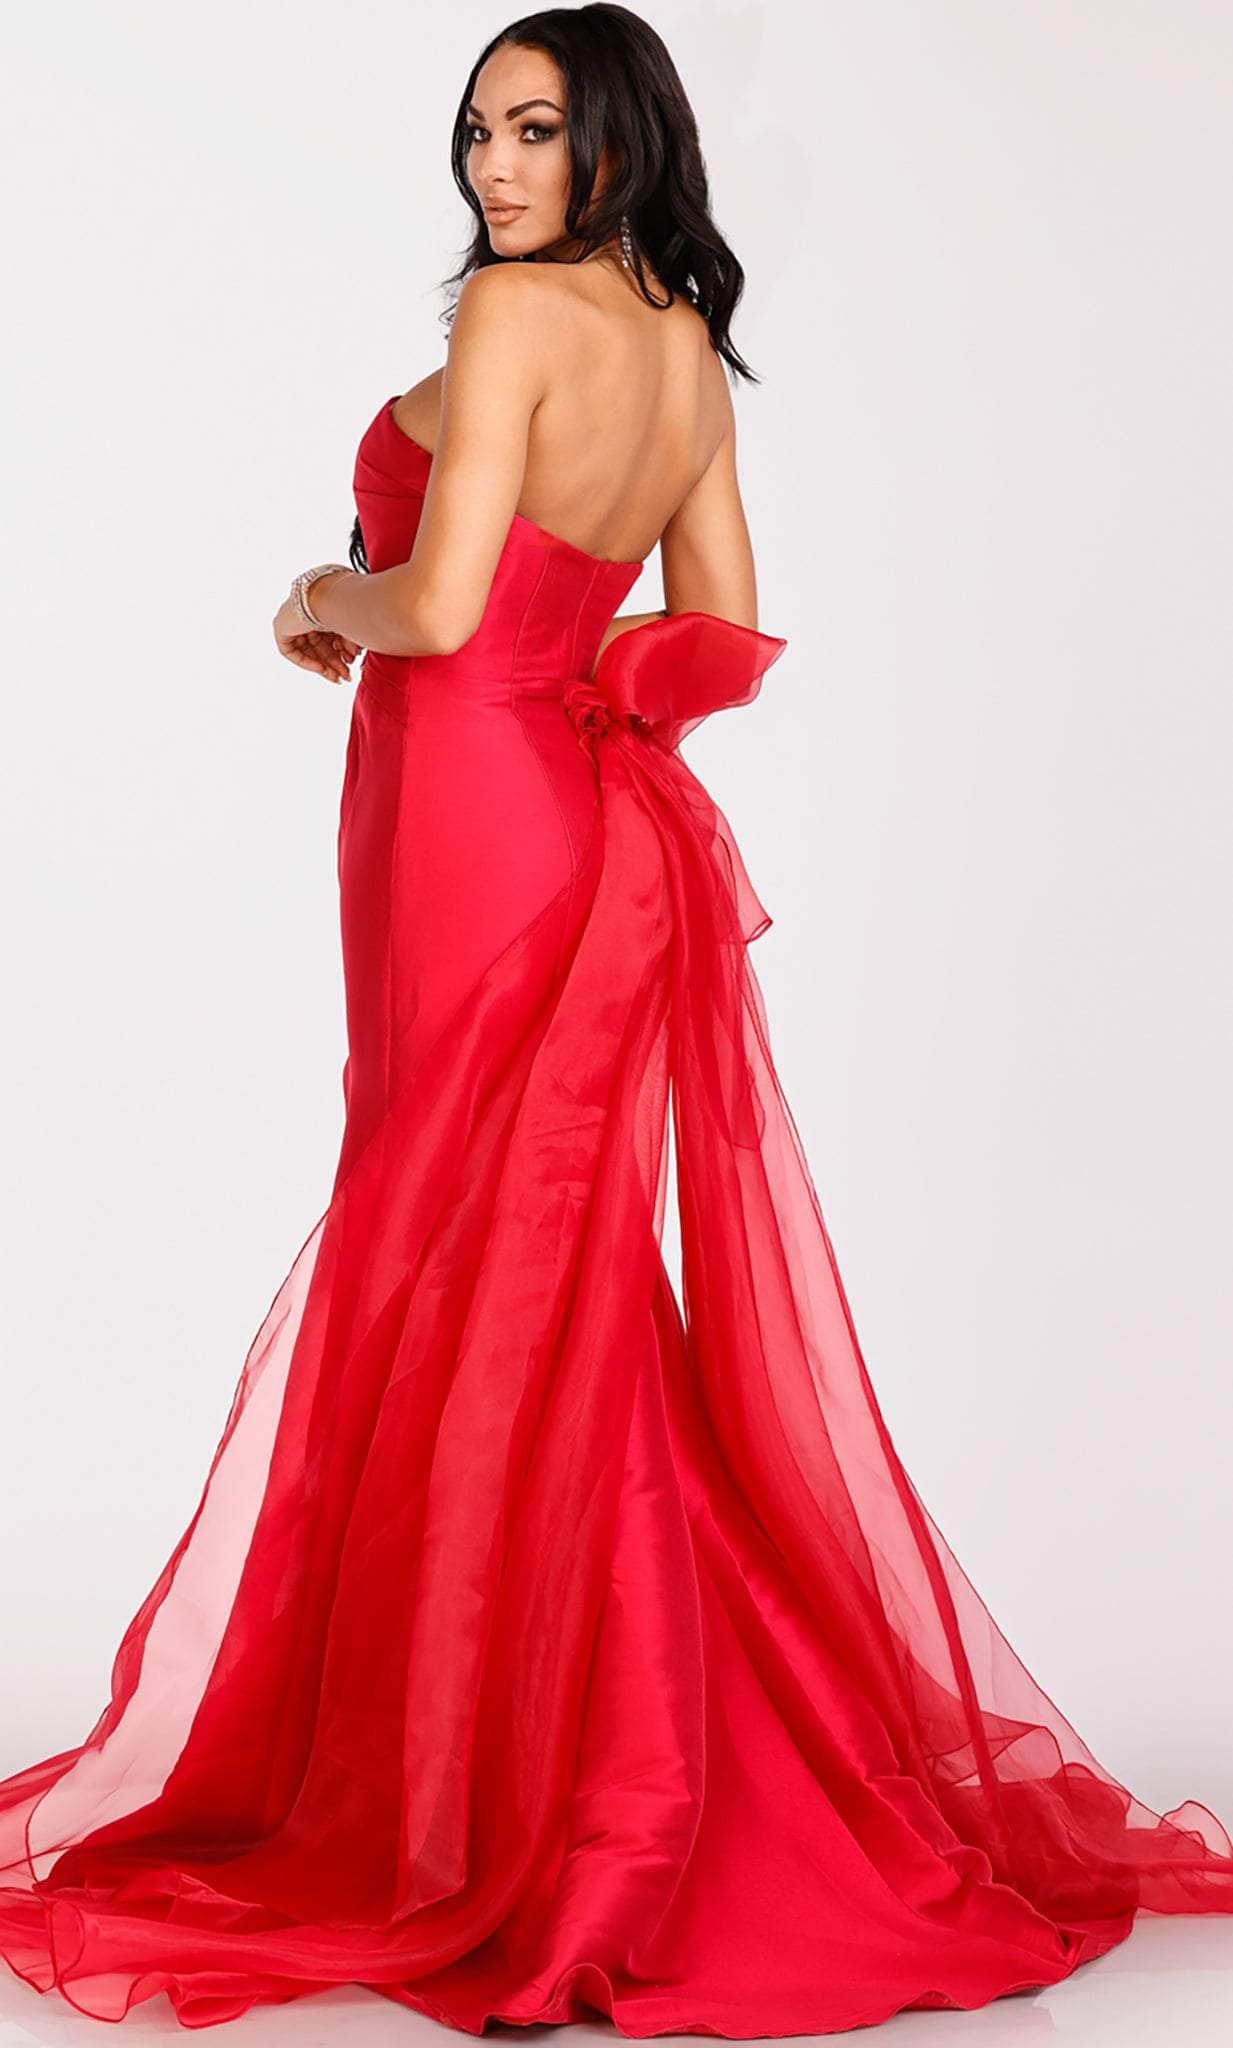 Terani Couture 231P0108 - Strapless Bow Accented Evening Gown Special Occasion Dress